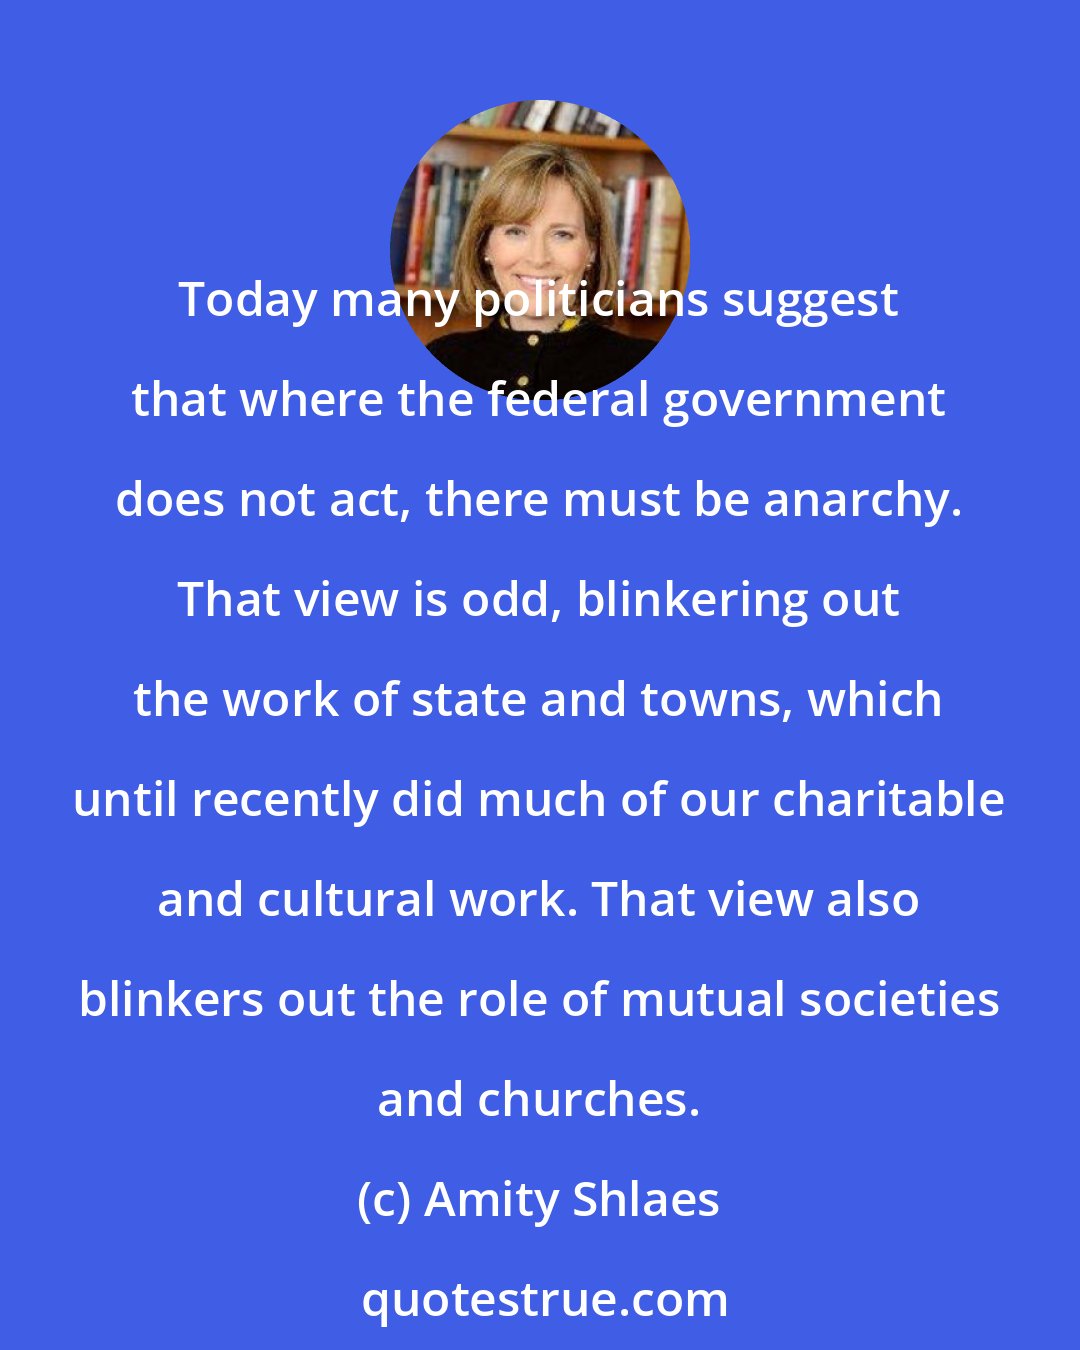 Amity Shlaes: Today many politicians suggest that where the federal government does not act, there must be anarchy. That view is odd, blinkering out the work of state and towns, which until recently did much of our charitable and cultural work. That view also blinkers out the role of mutual societies and churches.